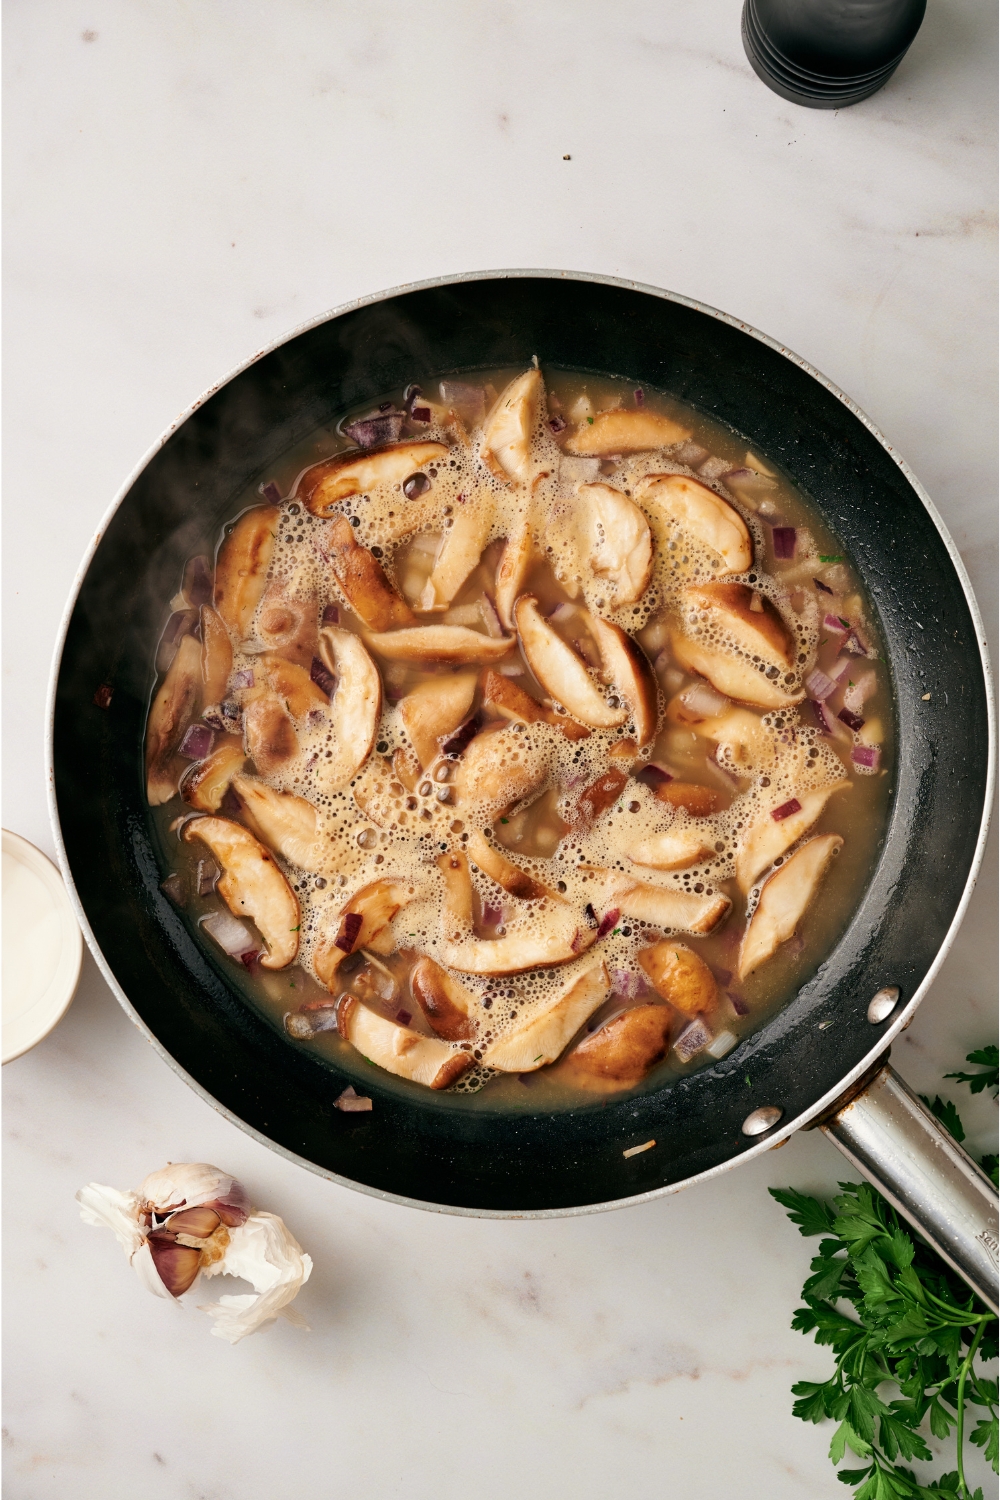 A skillet with the sauce and mushrooms being cooked down.